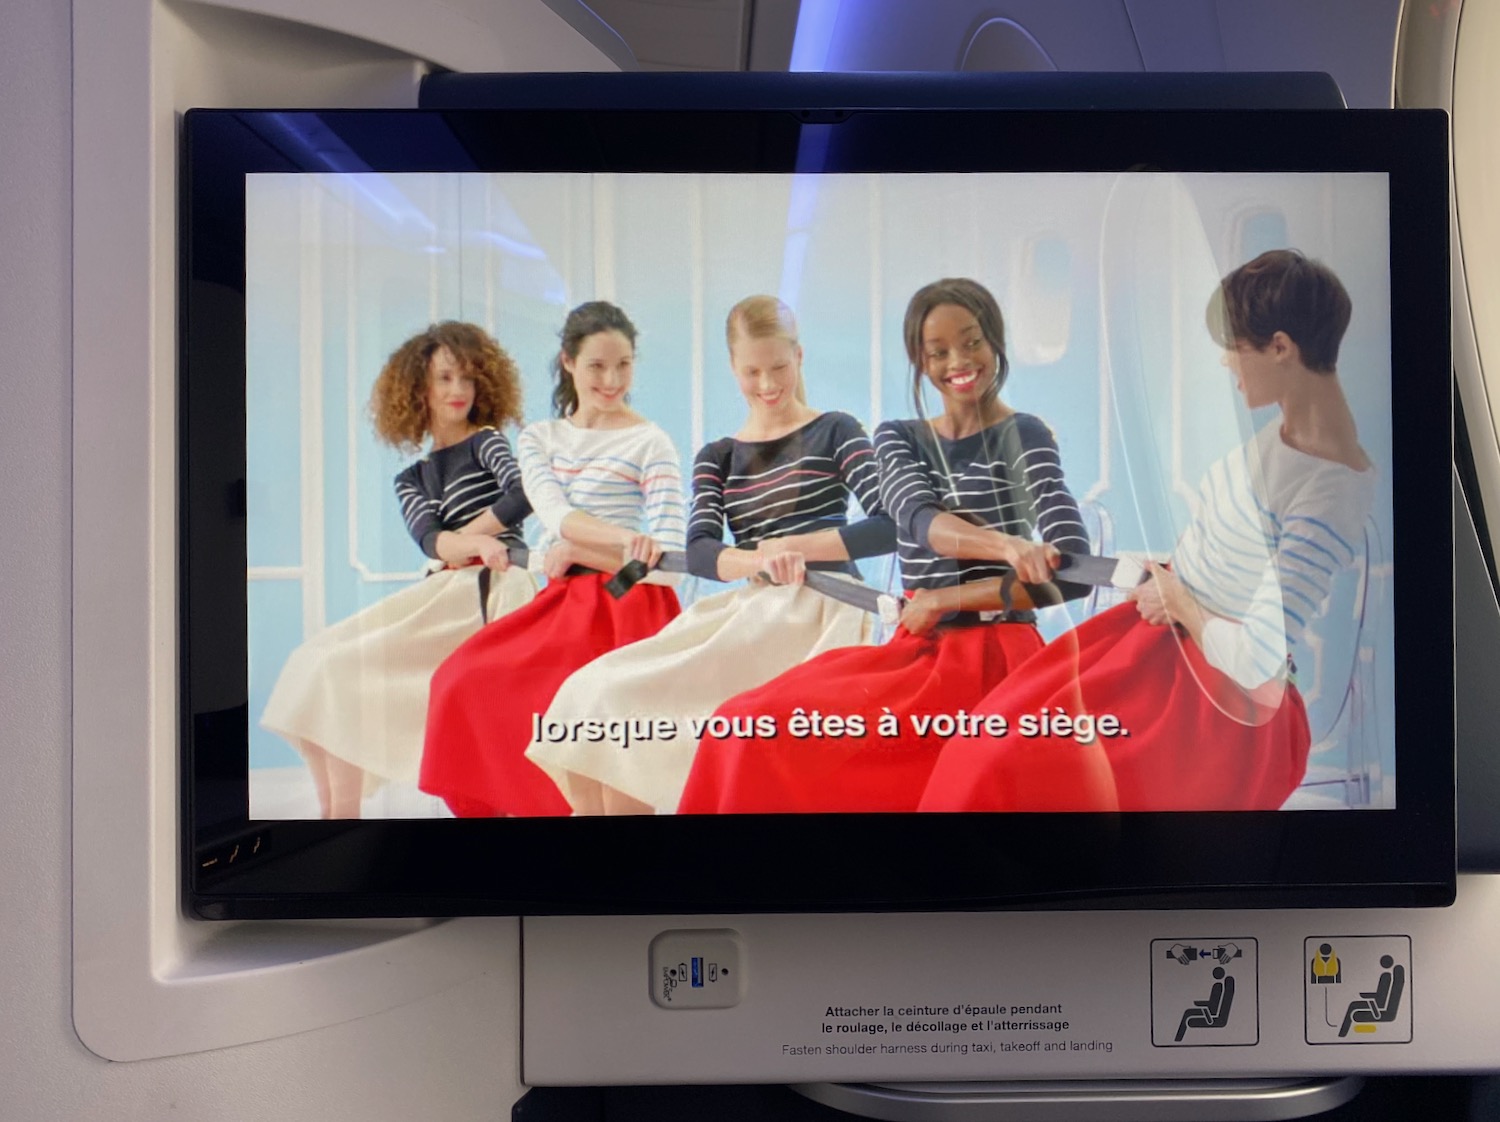 a screen with a group of women on it